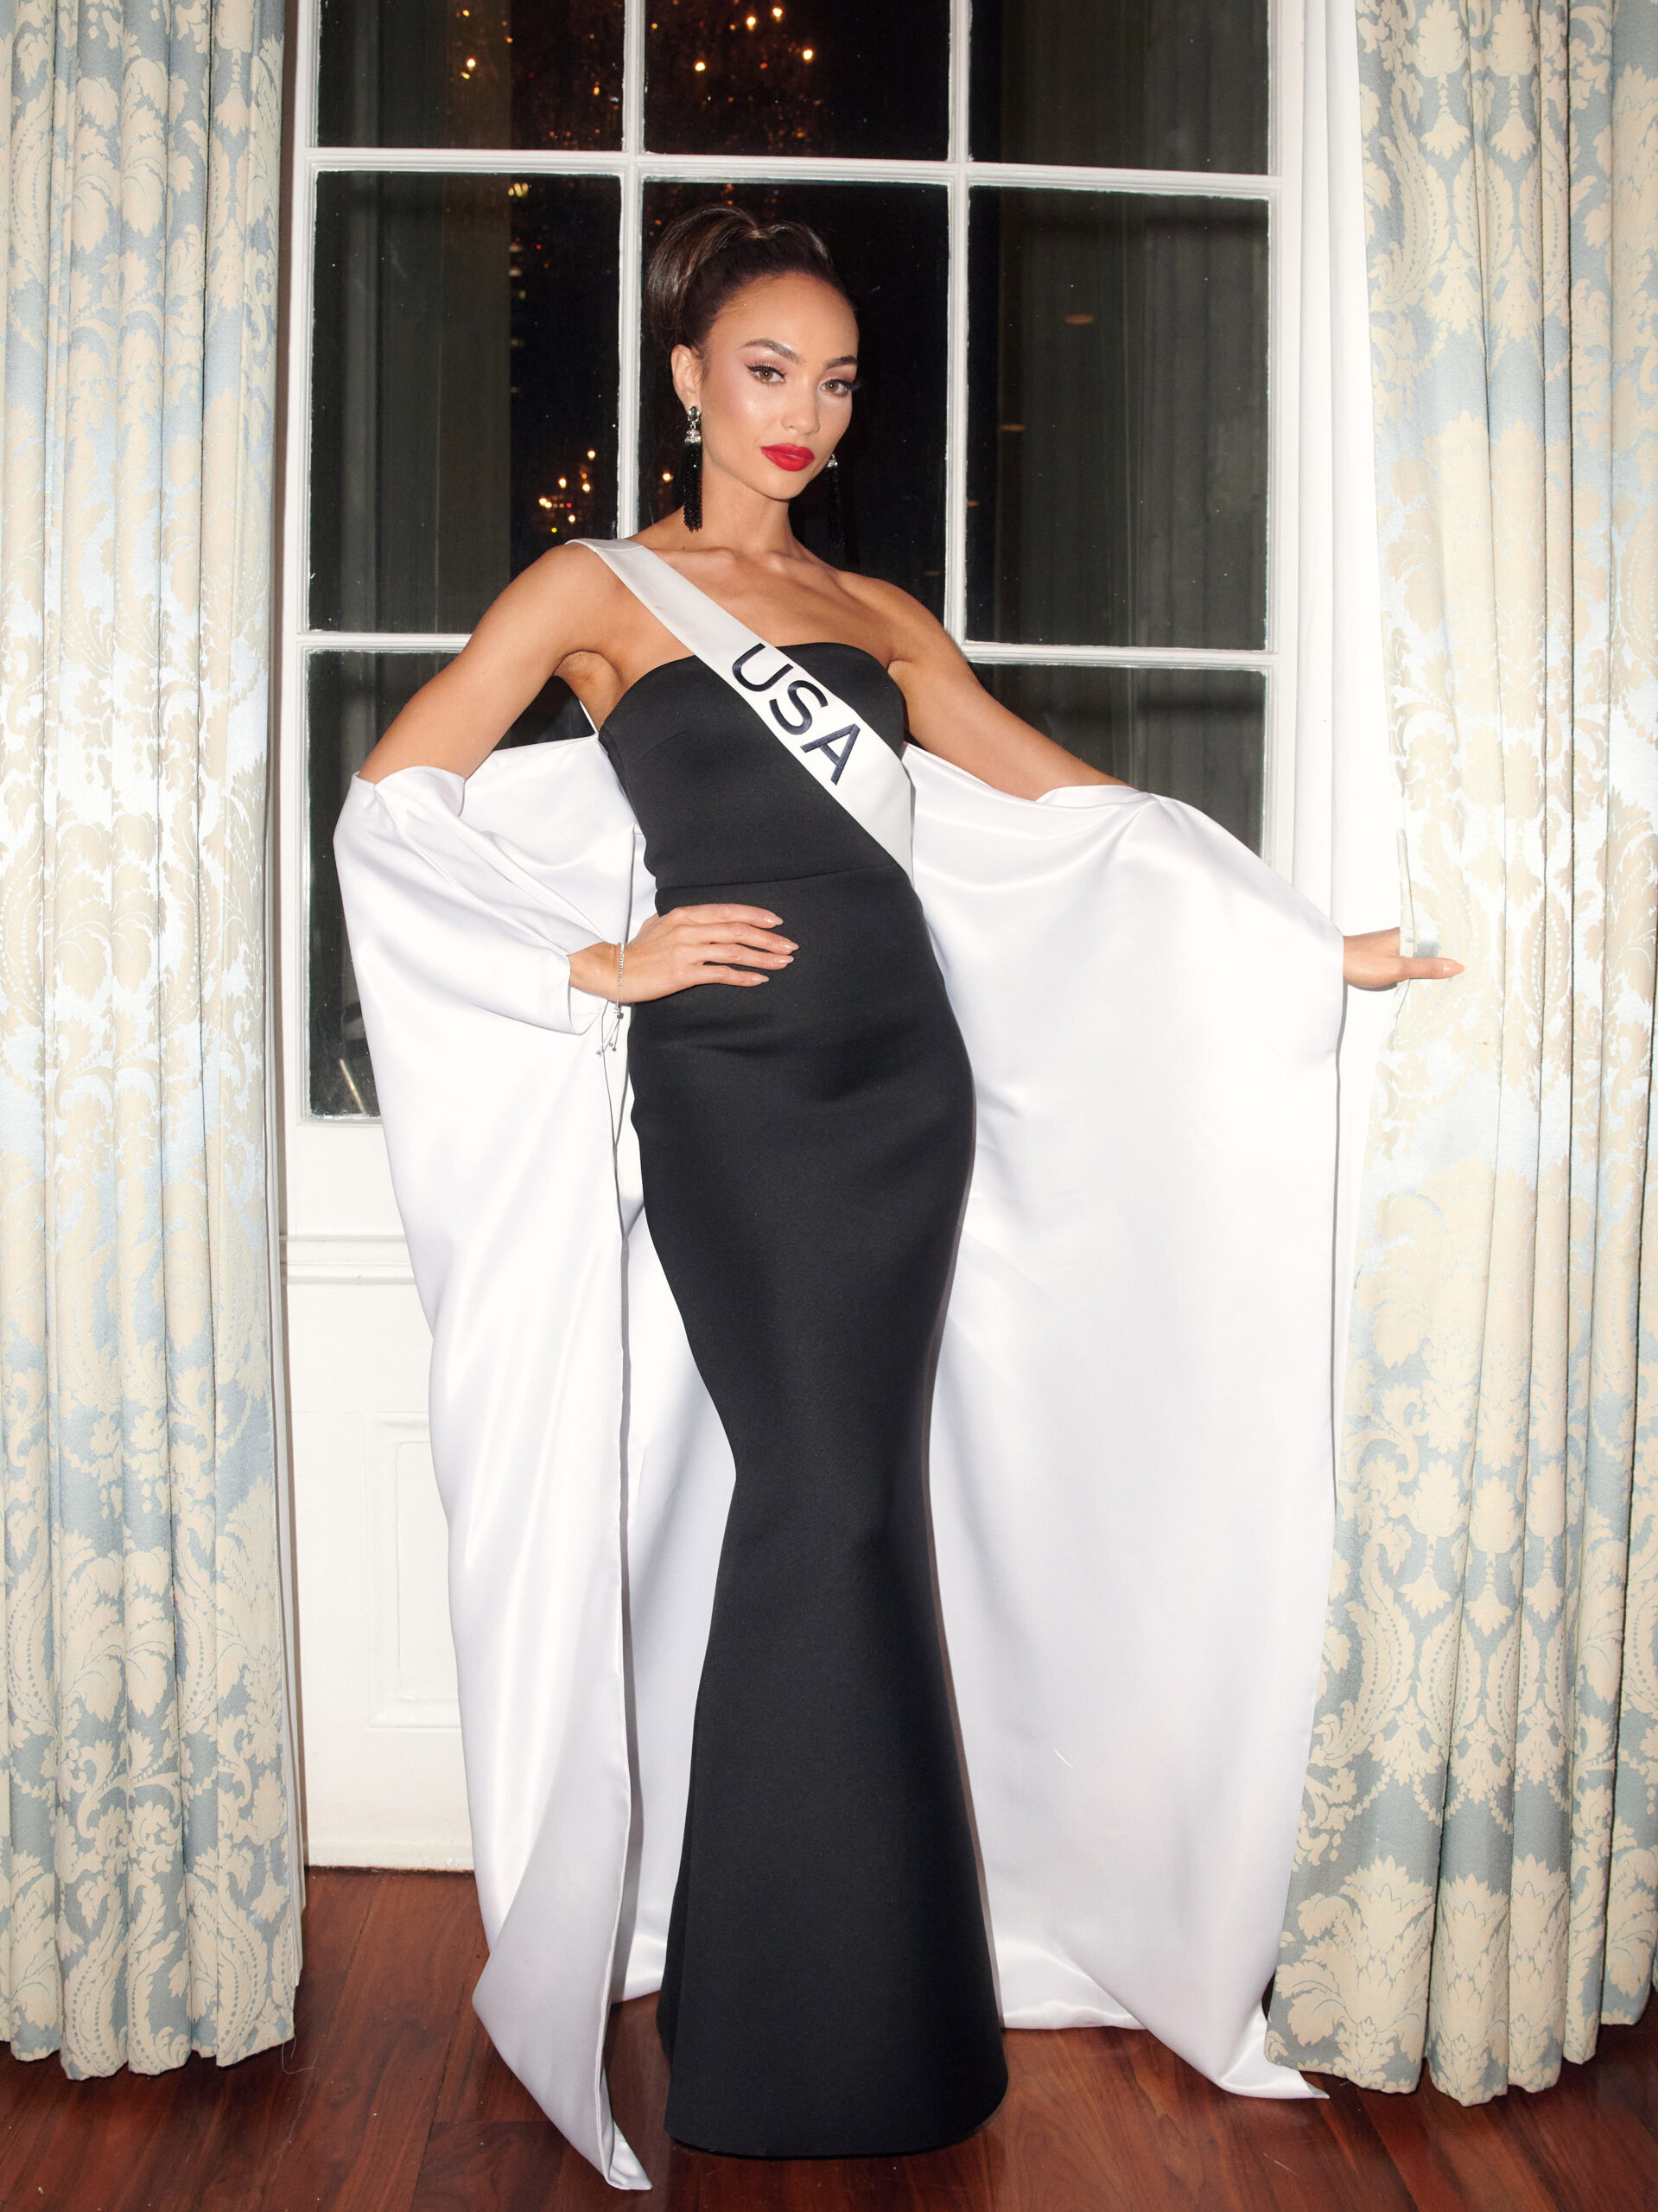 Texas' most recent Miss USA R’Bonney Gabriel attends the Miss Universe Welcome Reception at Gallier Hall in New Orleans, Louisiana